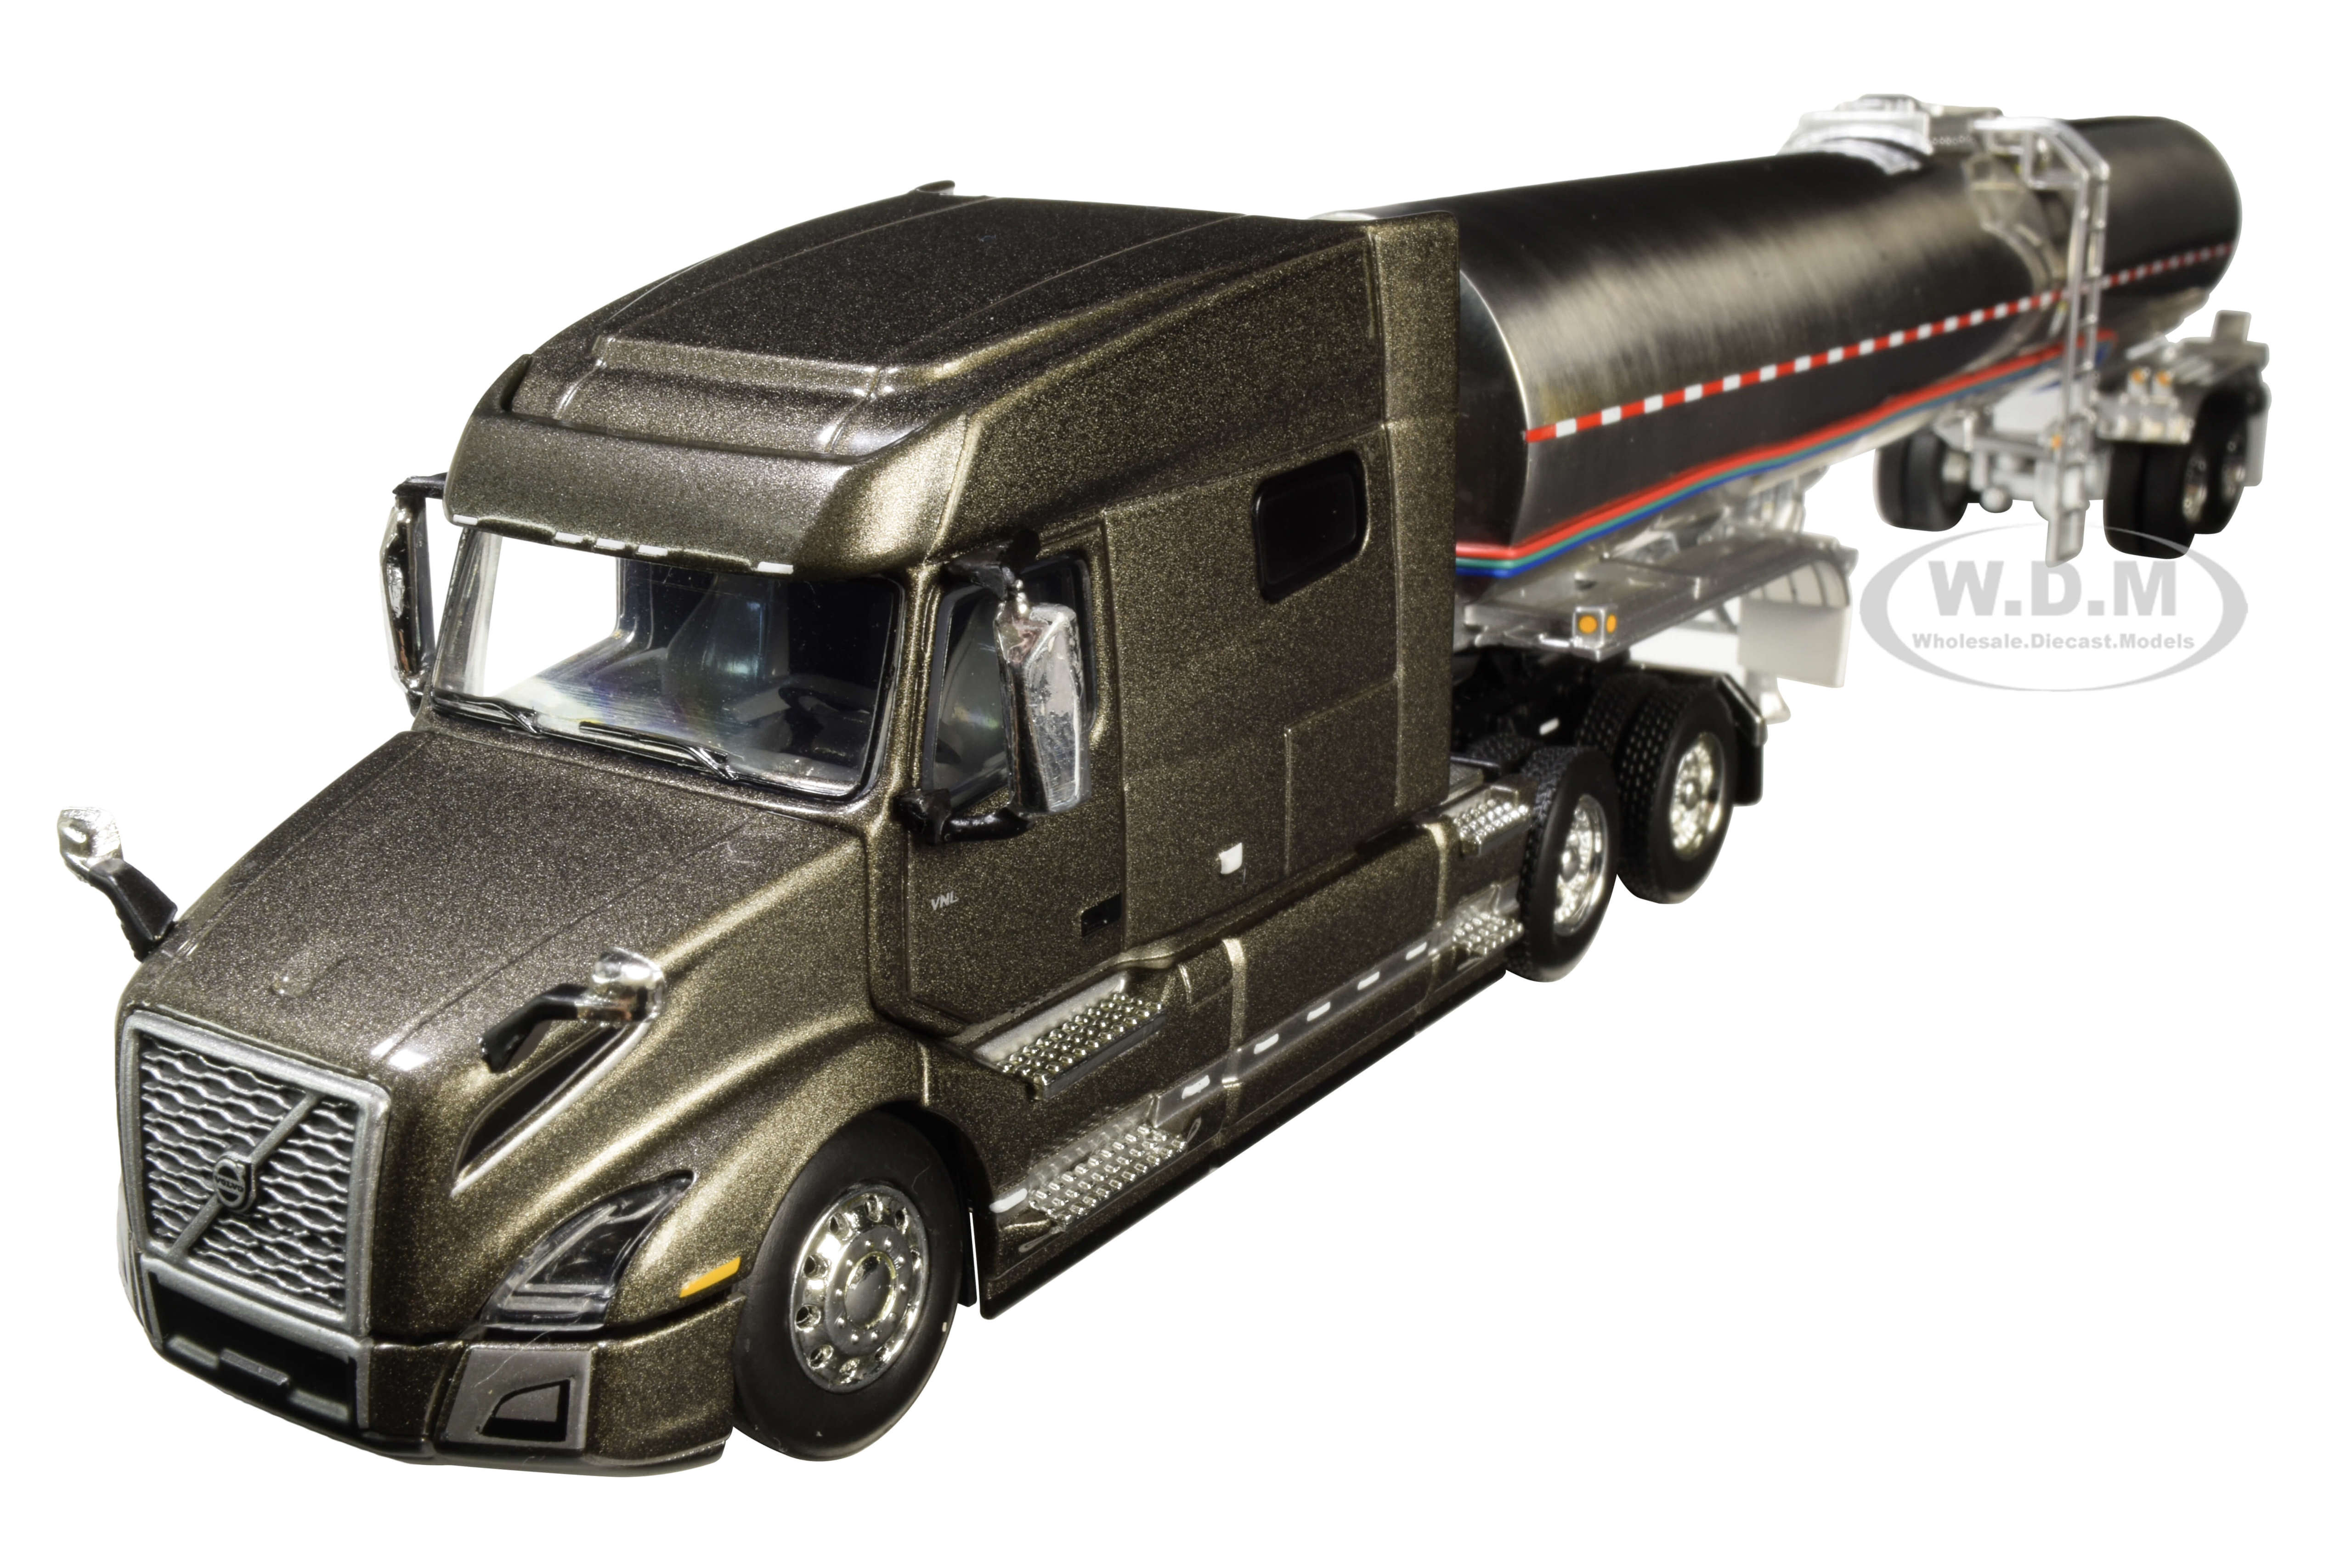 Volvo Vnl 740 Mid-roof Sleeper Cab Urban Bronze Metallic With Brenner Food-grade Chrome Tank Trailer 1/64 Diecast Model By Dcp/first Gear